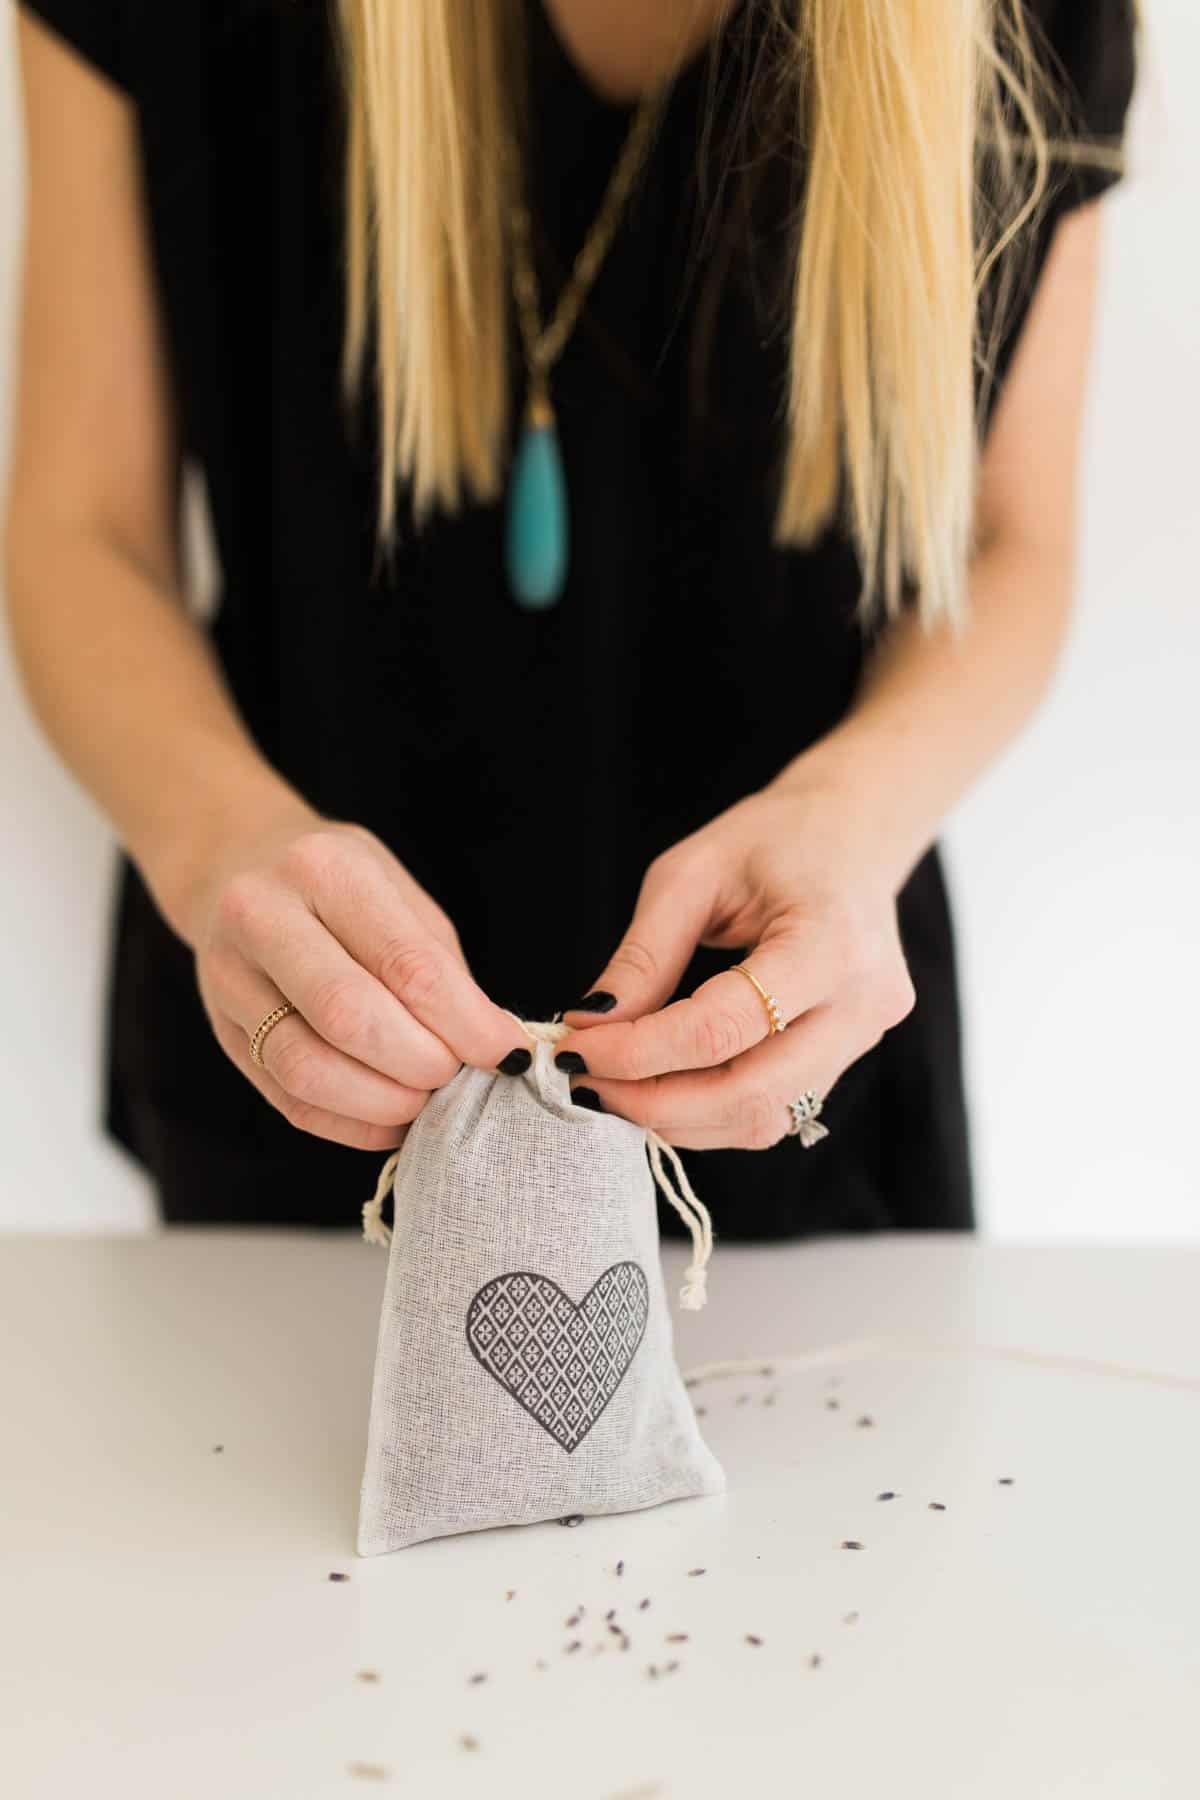 Tying a knot in a lavender sachet diy.